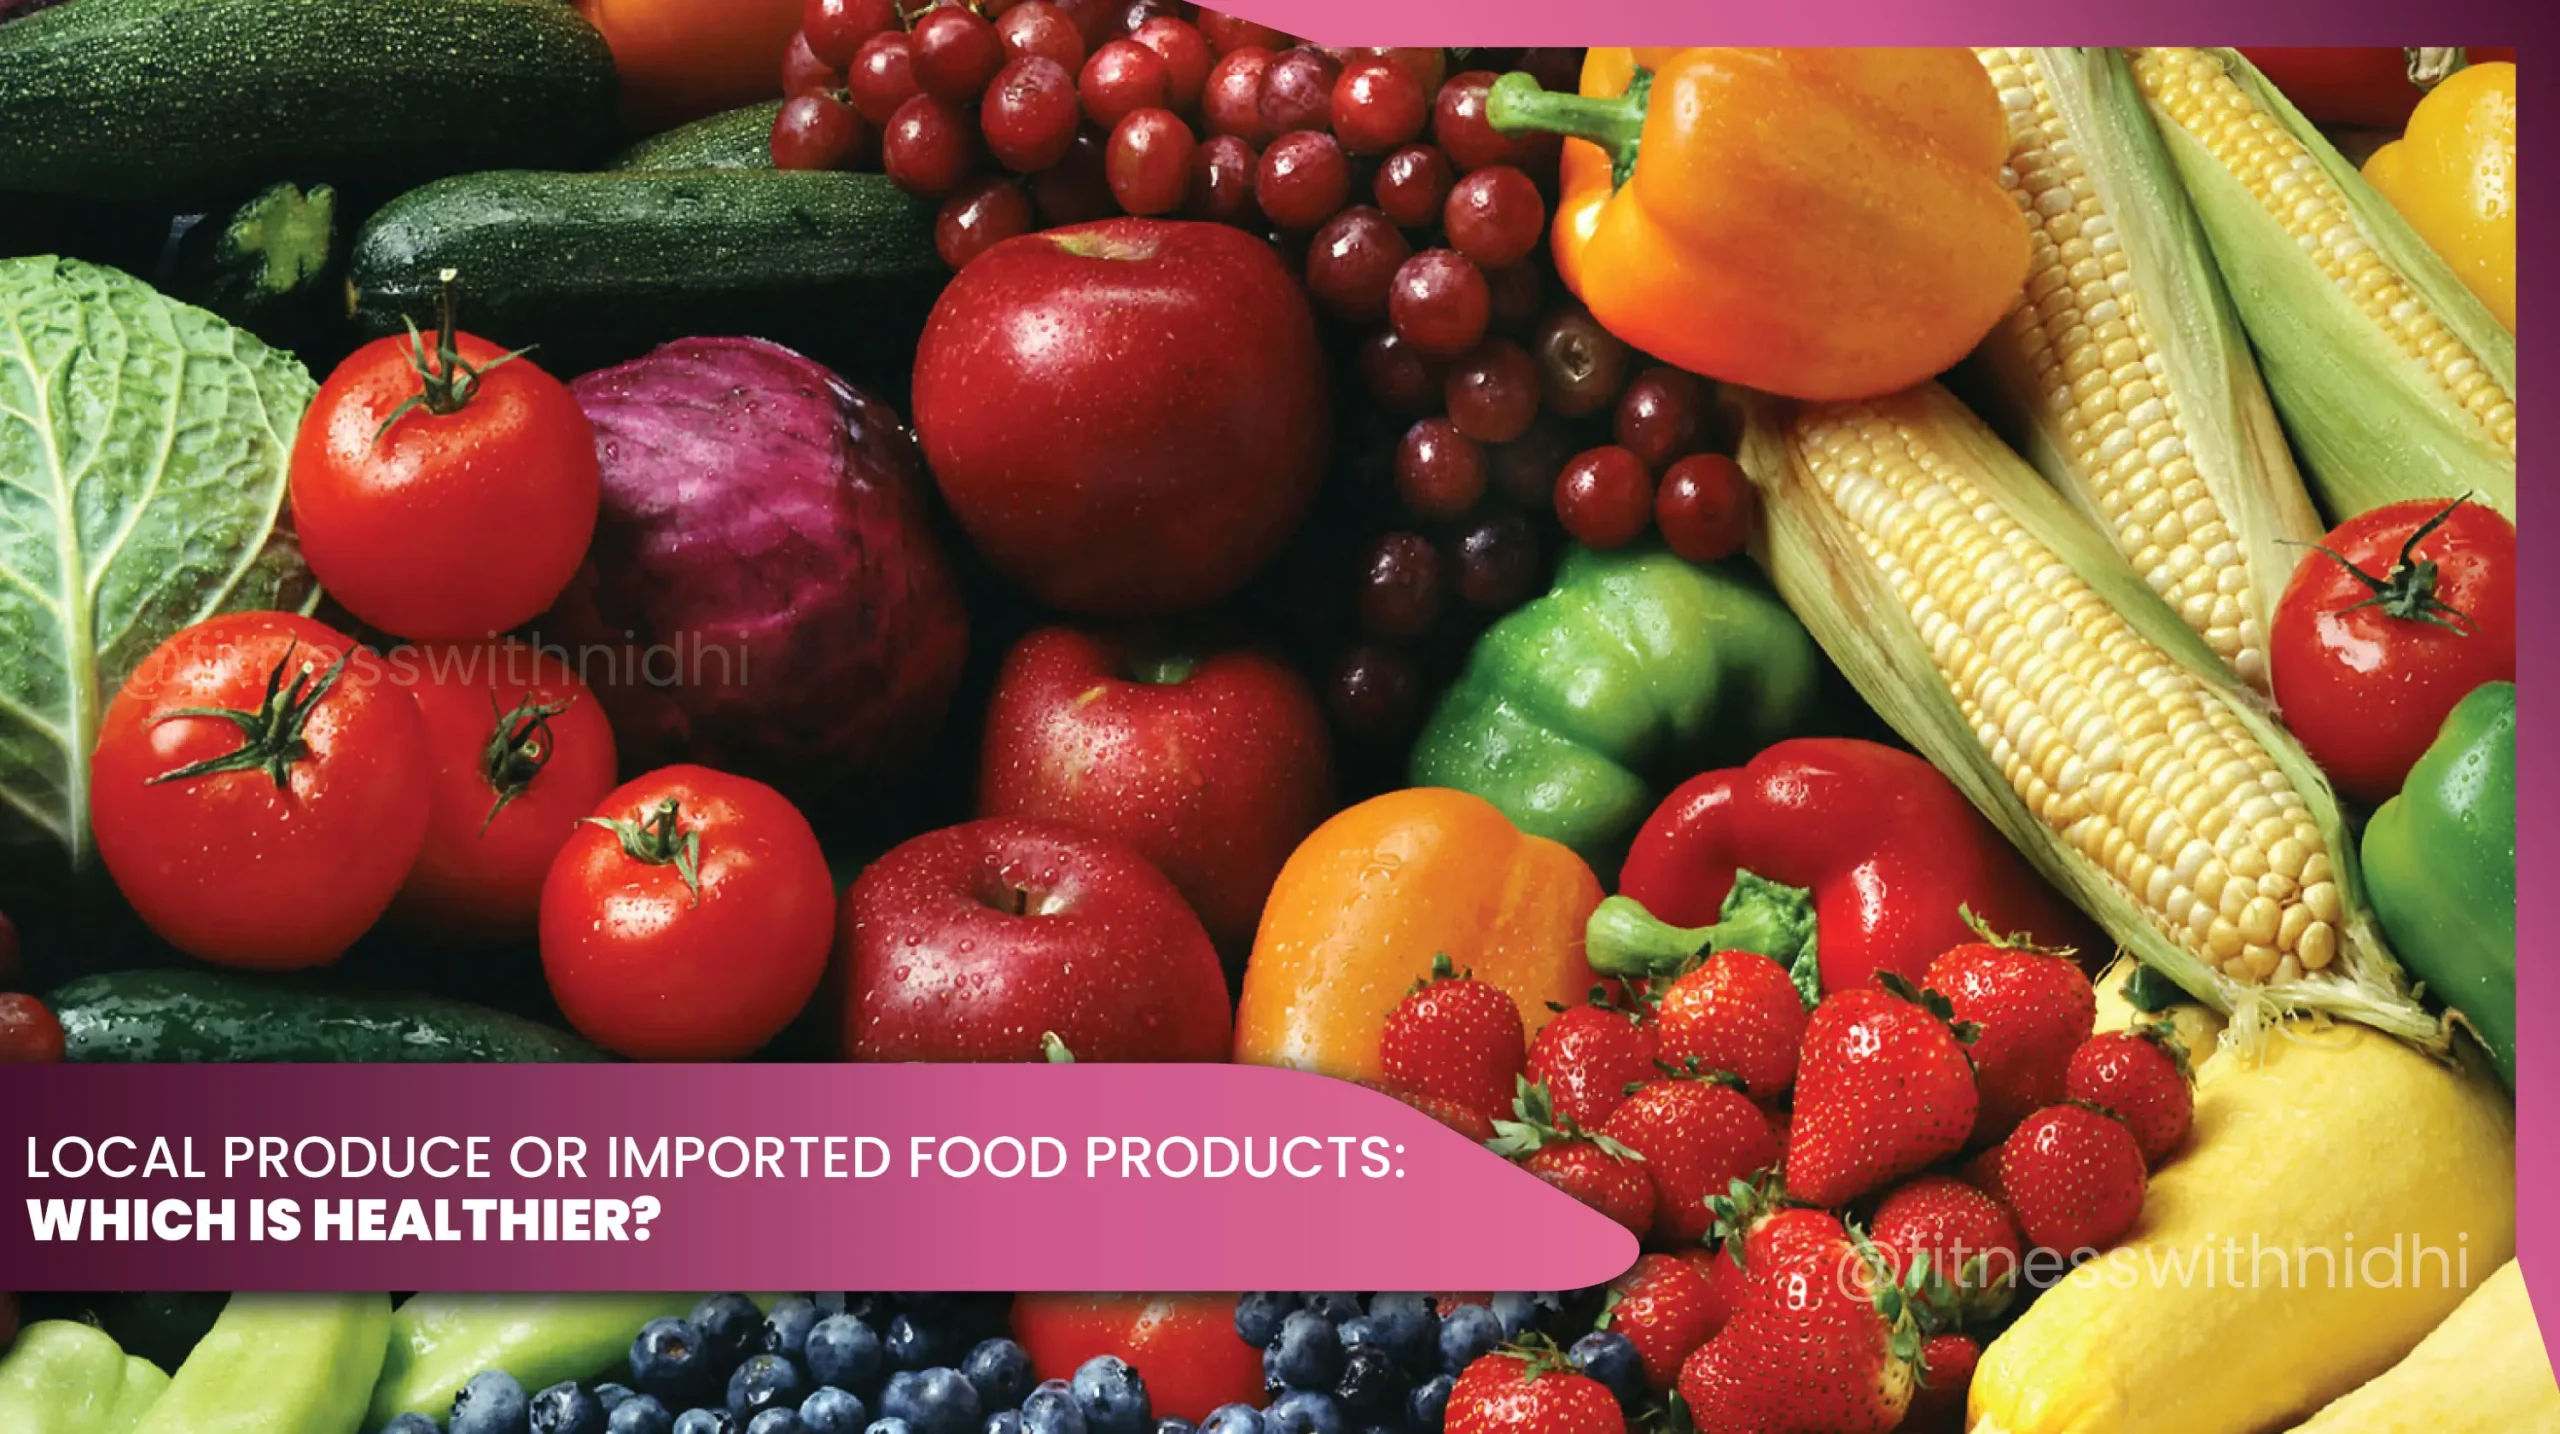 11local produce or imported food products: which is the correct choice